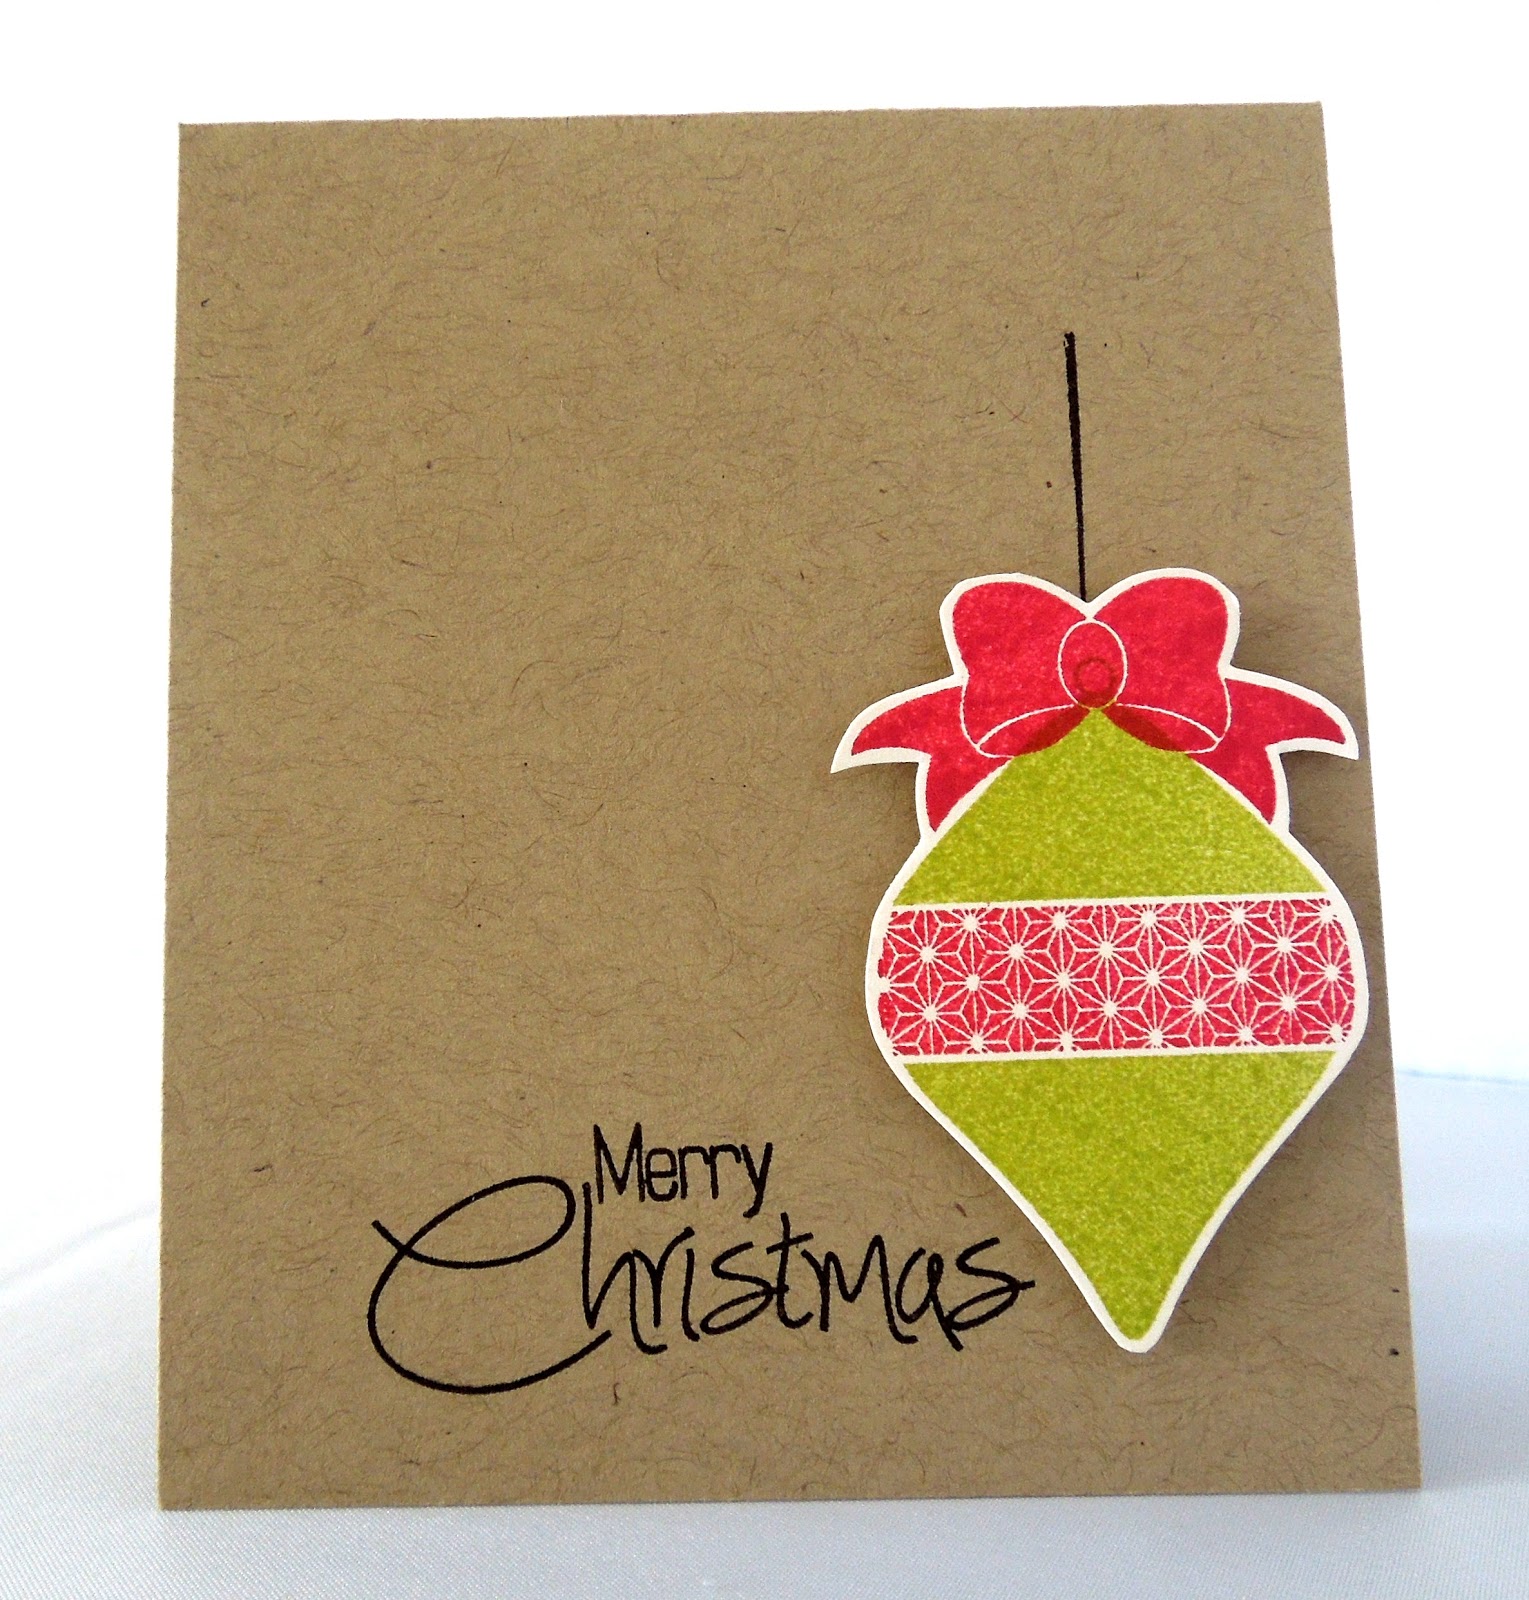 Stamping & Sharing: Quick & Simple Christmas Cards